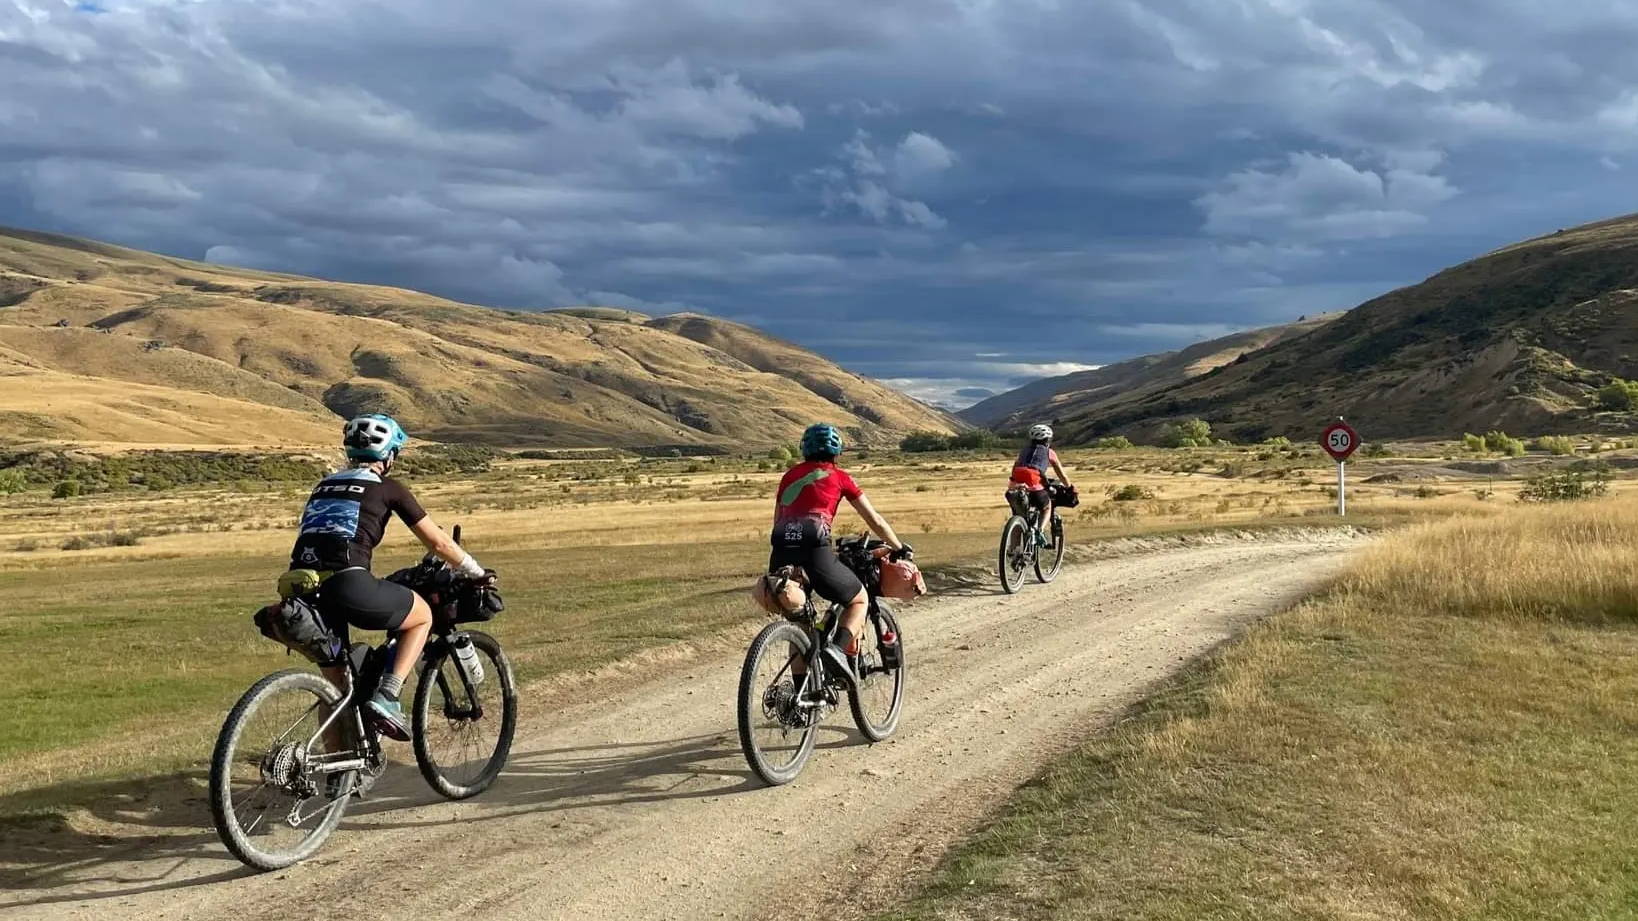 Three cyclists ride along a gravel road while dark storm clouds swirl over the hills in the distance.